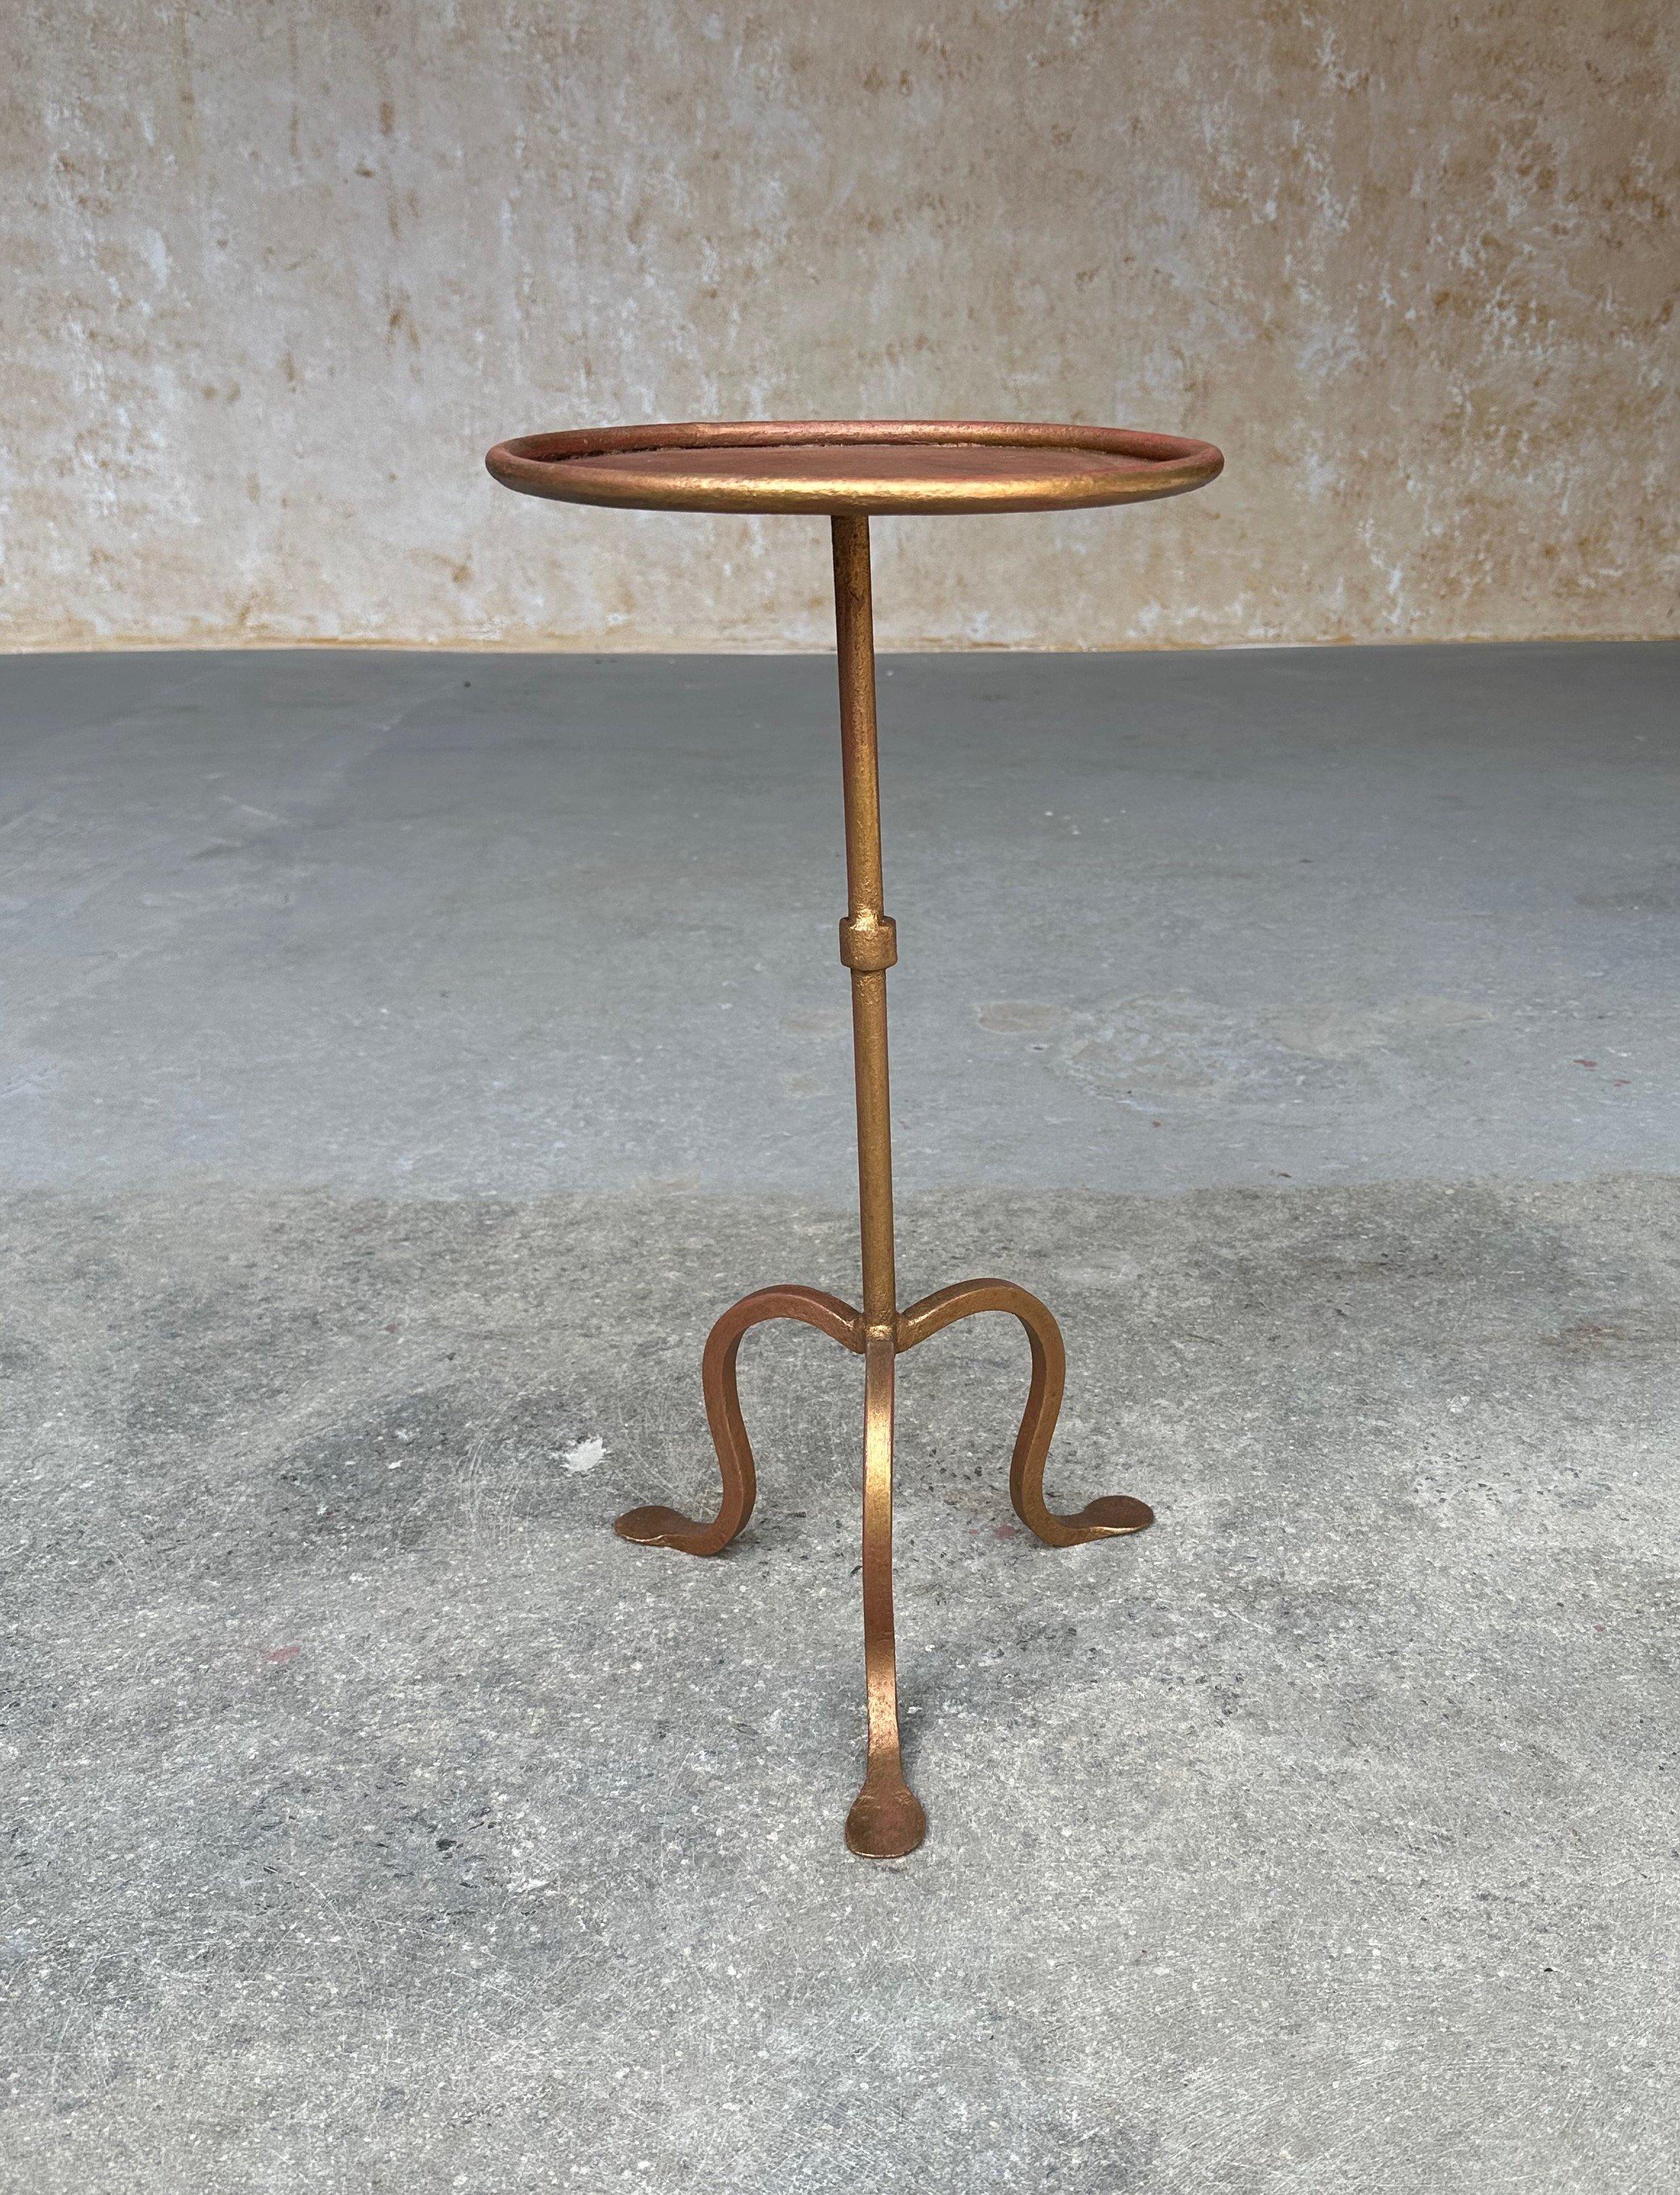 This lovely Spanish iron drinks table was recently crafted by skilled artisans and features a hand-applied gilt gold finish with red undertones. The stem has a central ring detail and is mounted on a sturdy tripod base with gracefully flared legs,